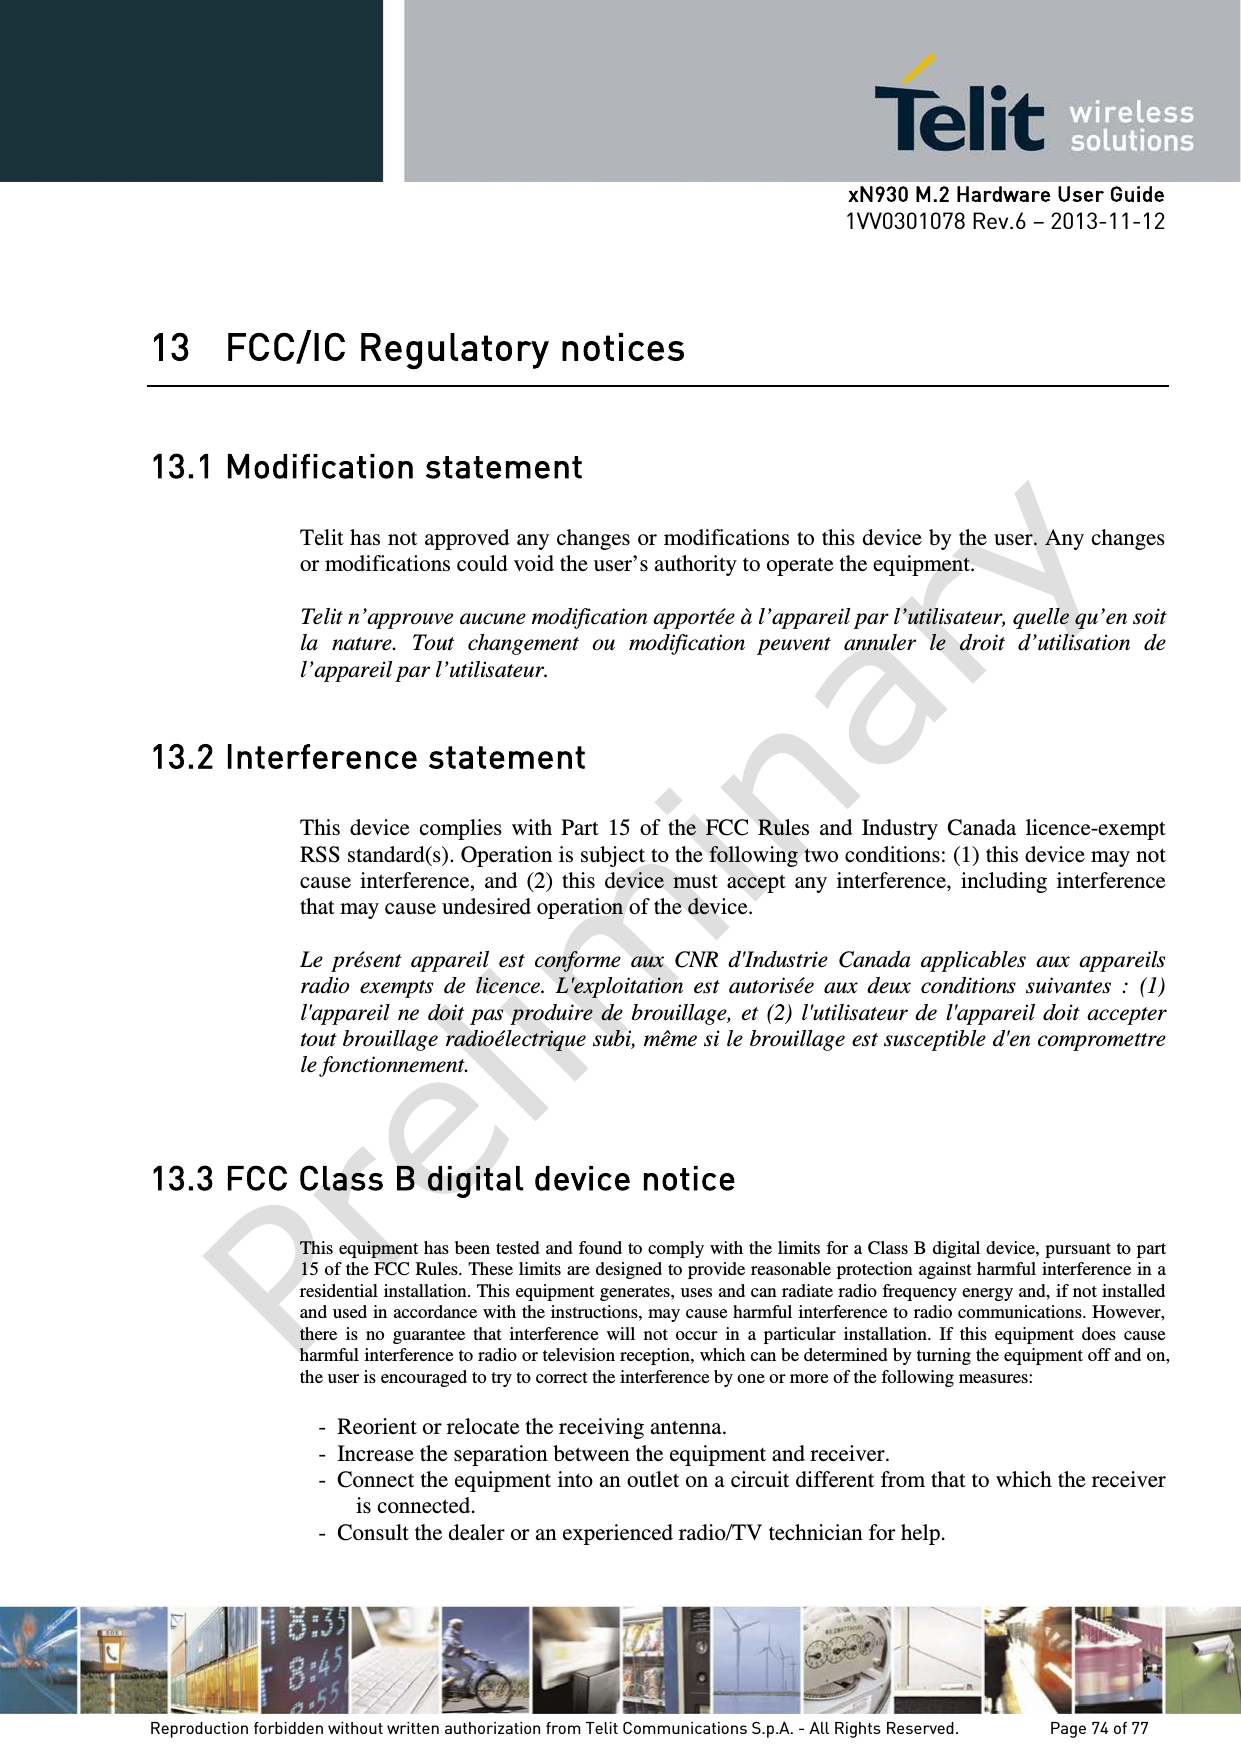      xN930 M.2 Hardware User Guide 1VV0301078 Rev.6 – 2013-11-12    13 FCC/IC Regulatory notices  13.1 Modification statement  Telit has not approved any changes or modifications to this device by the user. Any changes or modifications could void the user’s authority to operate the equipment.  Telit n’approuve aucune modification apportée à l’appareil par l’utilisateur, quelle qu’en soit la nature. Tout changement ou modification peuvent annuler le droit d’utilisation de l’appareil par l’utilisateur.  13.2 Interference statement  This device complies with Part 15 of the FCC Rules and Industry Canada licence-exempt RSS standard(s). Operation is subject to the following two conditions: (1) this device may not cause interference, and (2) this device must accept any interference, including interference that may cause undesired operation of the device.  Le présent appareil est conforme aux CNR d&apos;Industrie Canada applicables aux appareils radio exempts de licence. L&apos;exploitation est autorisée aux deux conditions suivantes : (1) l&apos;appareil ne doit pas produire de brouillage, et (2) l&apos;utilisateur de l&apos;appareil doit accepter tout brouillage radioélectrique subi, même si le brouillage est susceptible d&apos;en compromettre le fonctionnement.   13.3 FCC Class B digital device notice  This equipment has been tested and found to comply with the limits for a Class B digital device, pursuant to part 15 of the FCC Rules. These limits are designed to provide reasonable protection against harmful interference in a residential installation. This equipment generates, uses and can radiate radio frequency energy and, if not installed and used in accordance with the instructions, may cause harmful interference to radio communications. However, there is no guarantee that interference will not occur in a particular installation. If this equipment does cause harmful interference to radio or television reception, which can be determined by turning the equipment off and on, the user is encouraged to try to correct the interference by one or more of the following measures:  - Reorient or relocate the receiving antenna. - Increase the separation between the equipment and receiver.  - Connect the equipment into an outlet on a circuit different from that to which the receiver is connected.  - Consult the dealer or an experienced radio/TV technician for help.    Reproduction forbidden without written authorization from Telit Communications S.p.A. - All Rights Reserved.    Page 74 of 77 